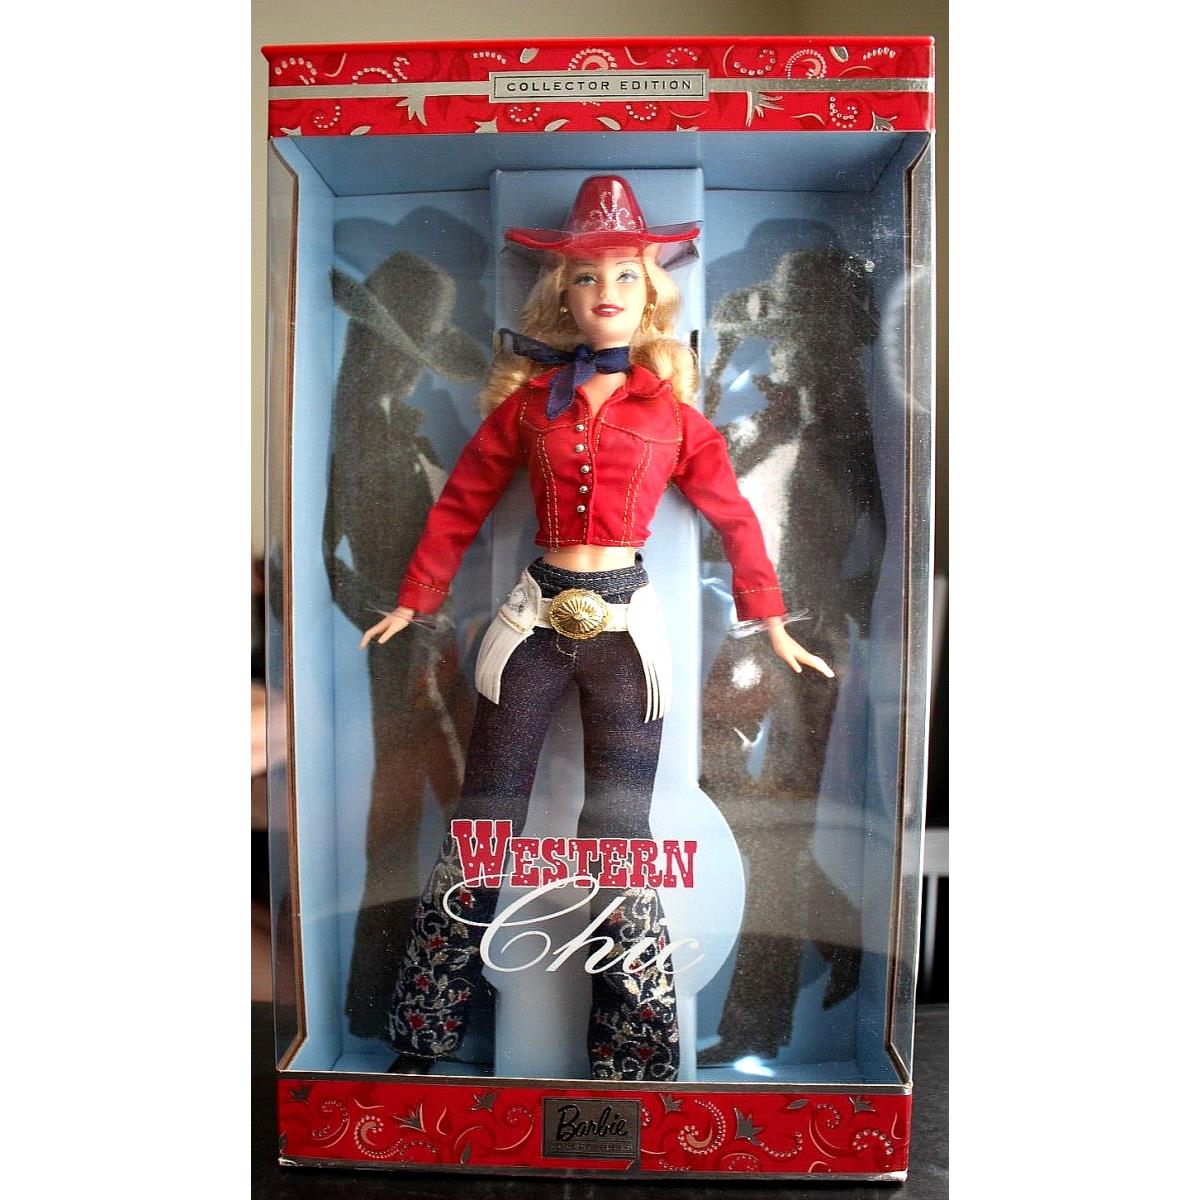 Western Chic Barbie Doll Collector Edition Silver Label Mattel Nrfb